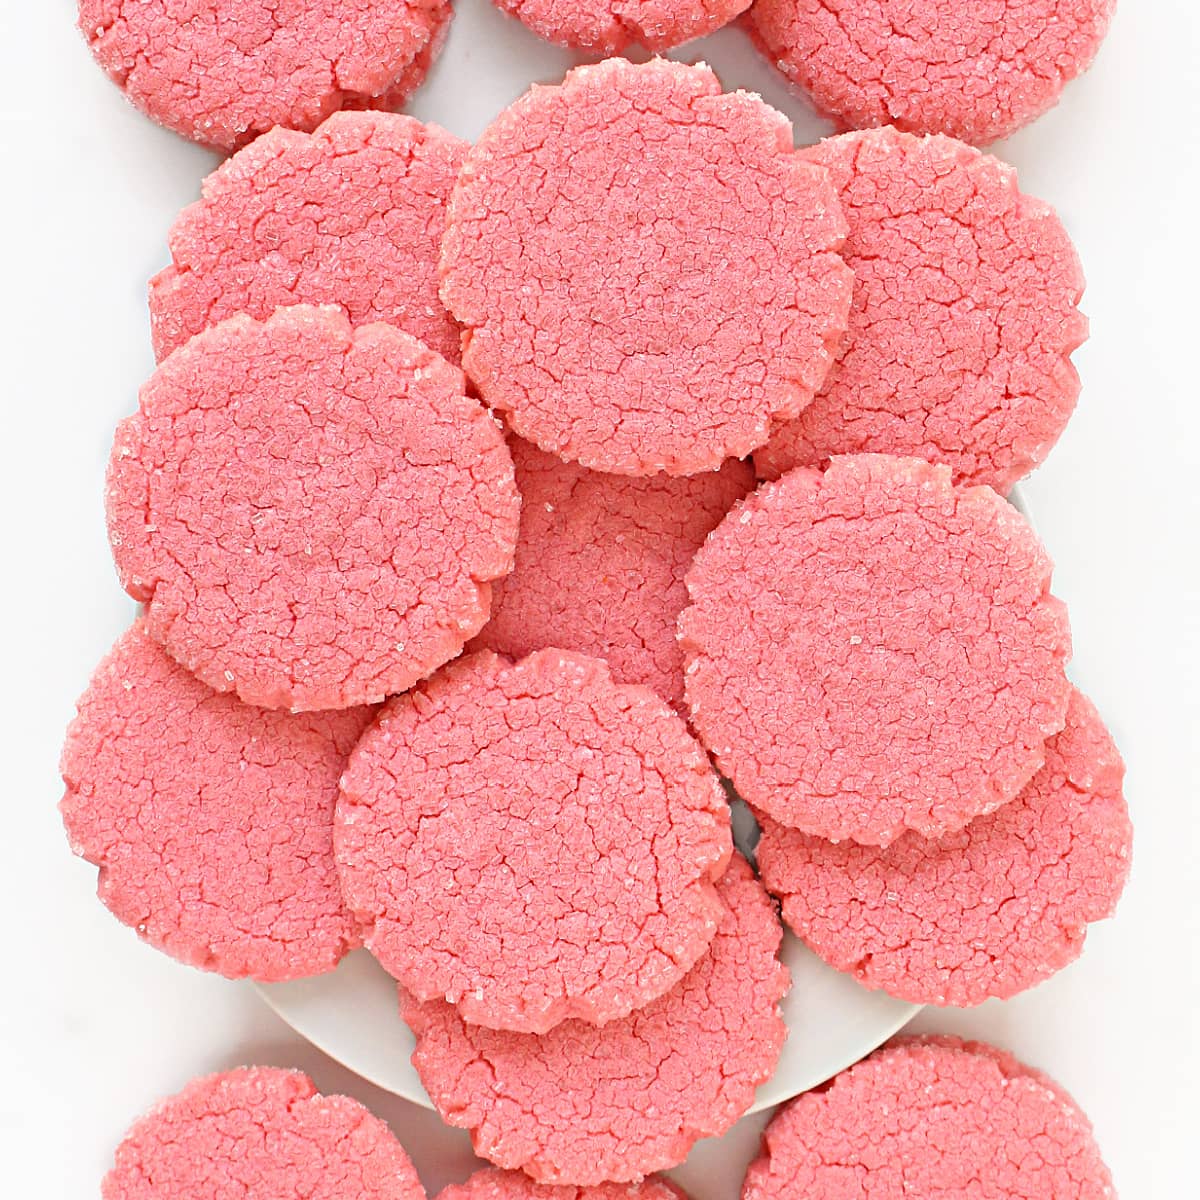 Closeup showing the crackled, flat tops of the large pink cookies.